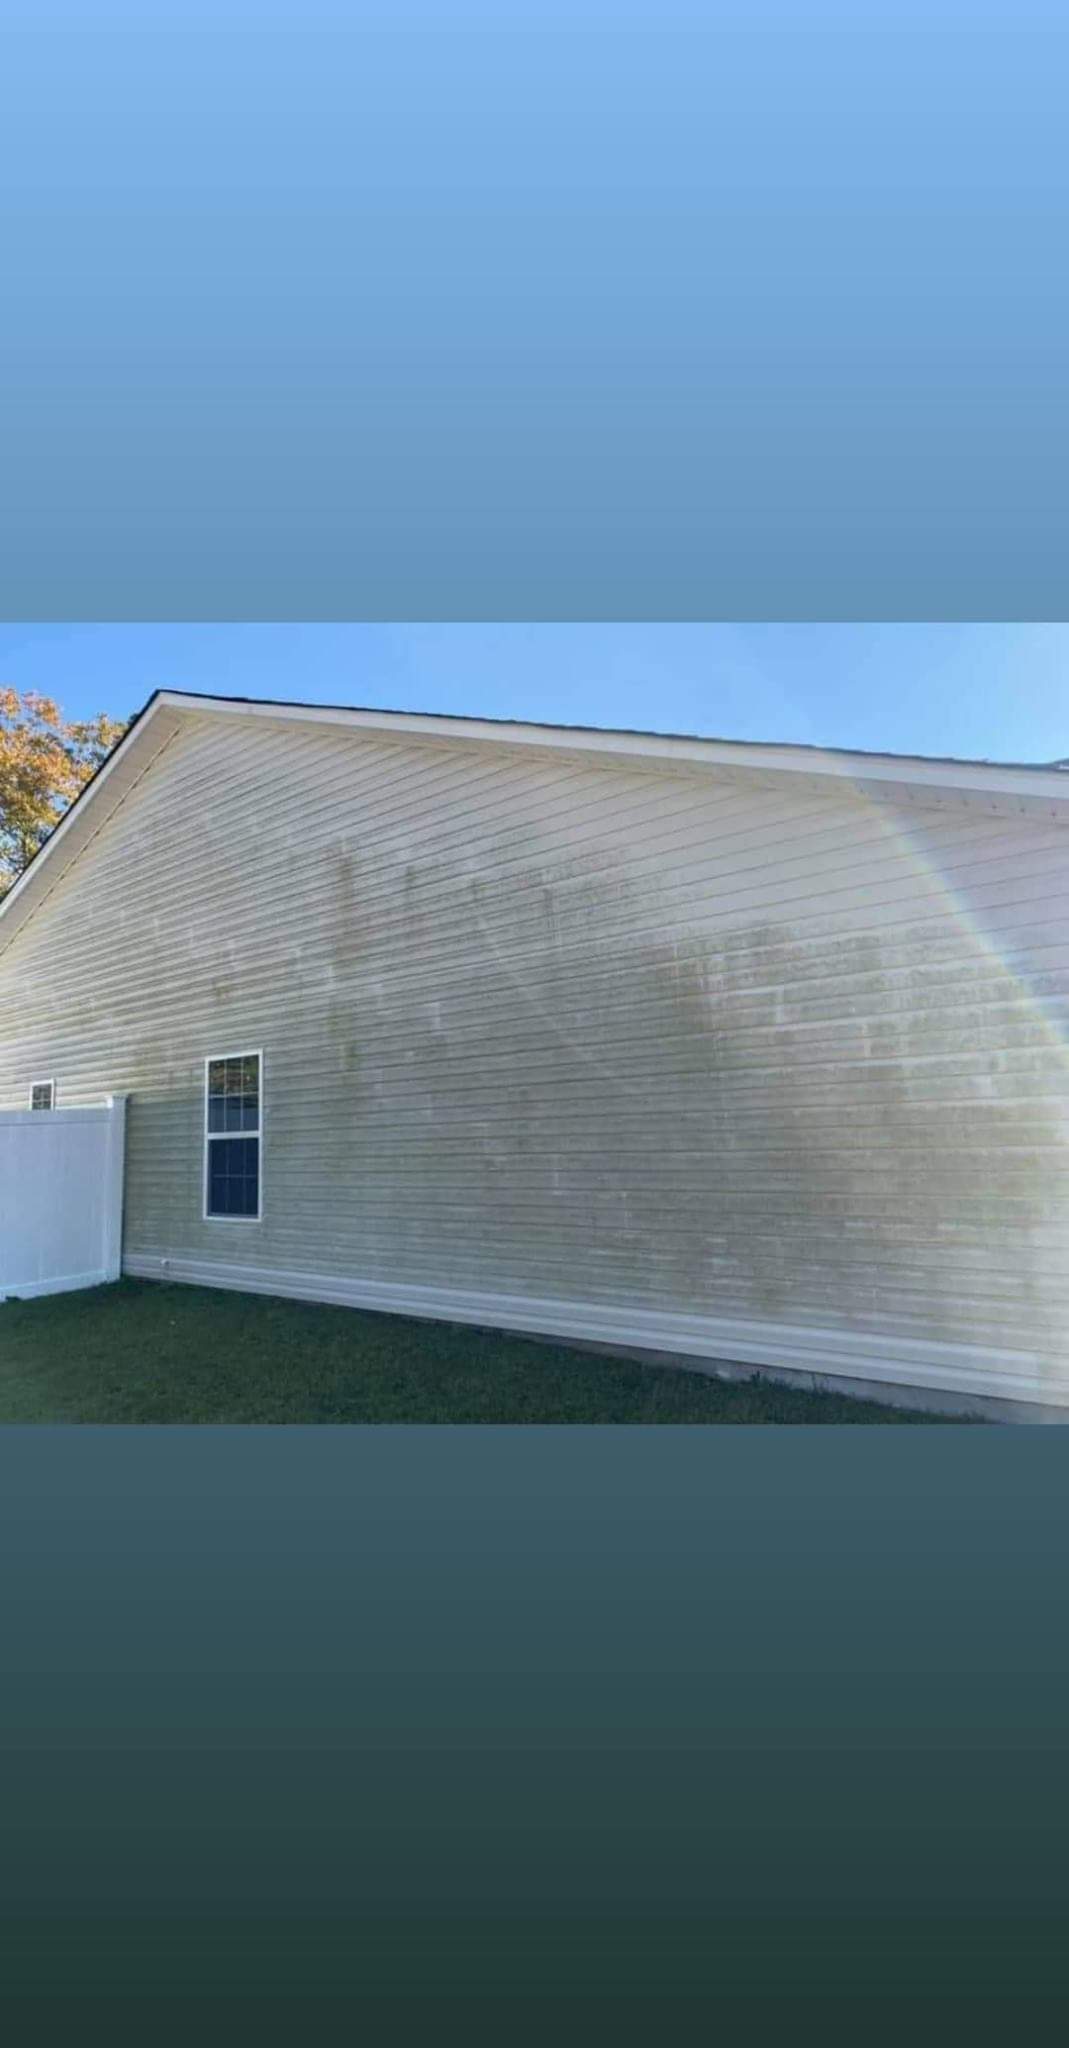 All American Pressure Washing / Detailing Services